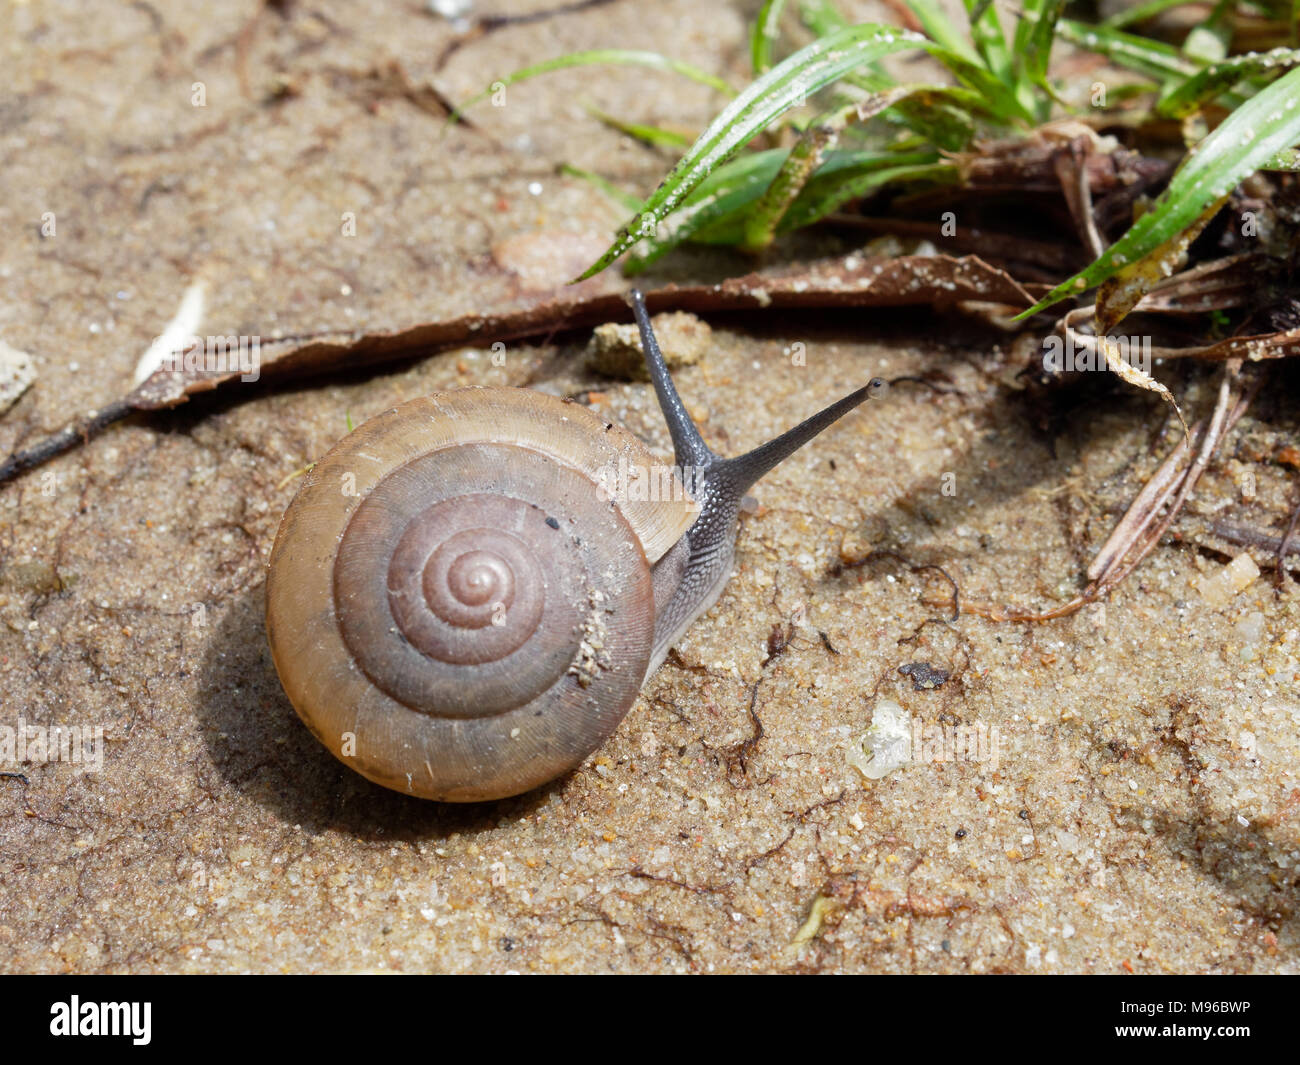 Brown snail, which its slime is used to make facial mask, with spiral shell crawl in the garden on the soil to grass show concepts of calm, relaxation, slow, or lazy Stock Photo